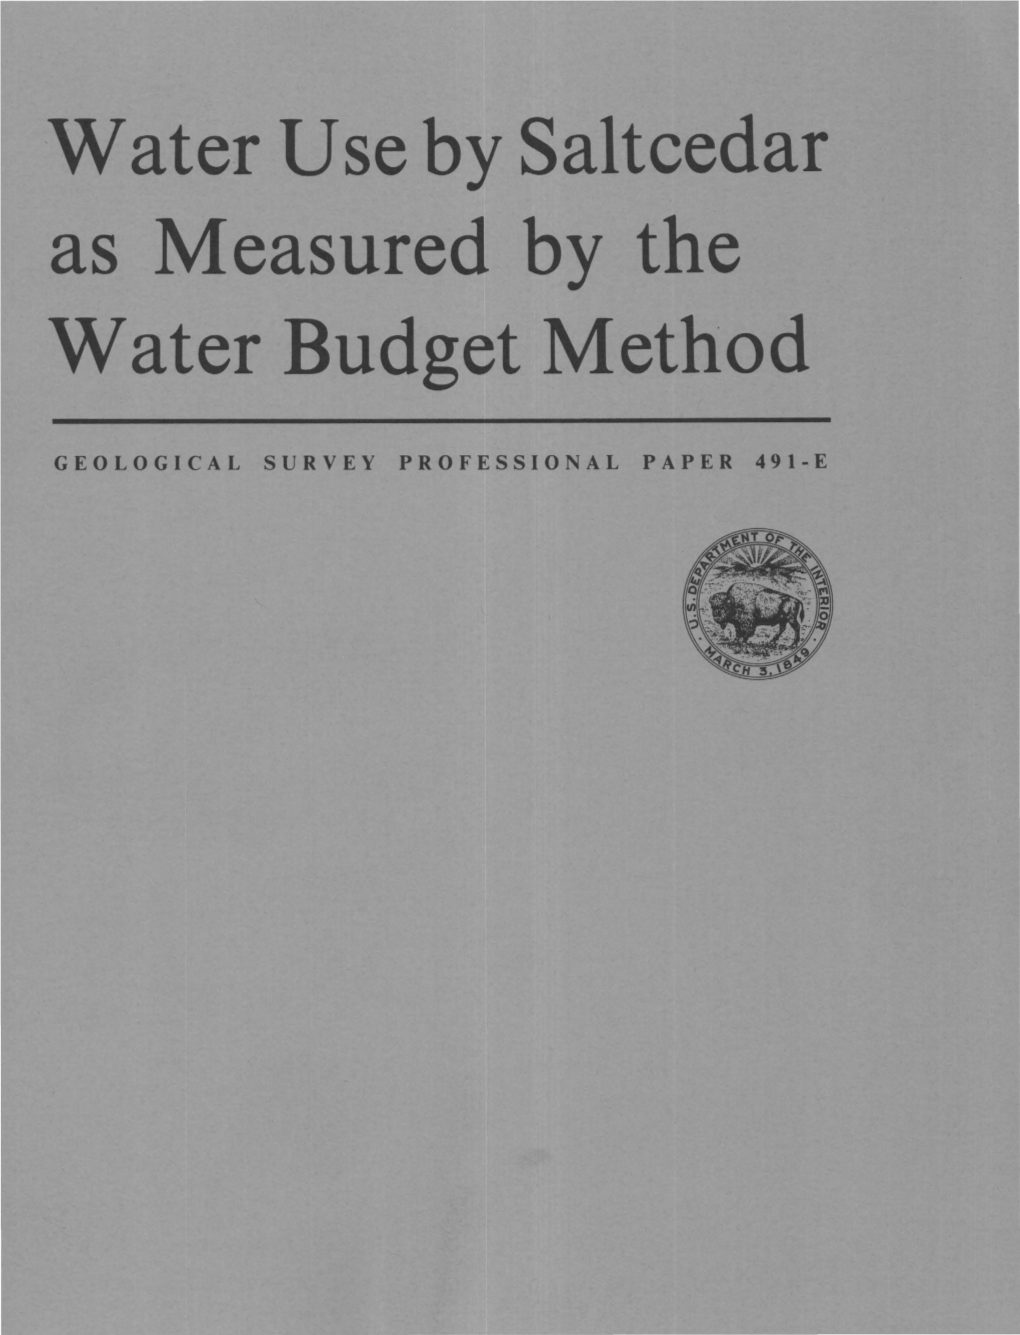 Water Use by Saltcedar As Measured by the Water Budget Method